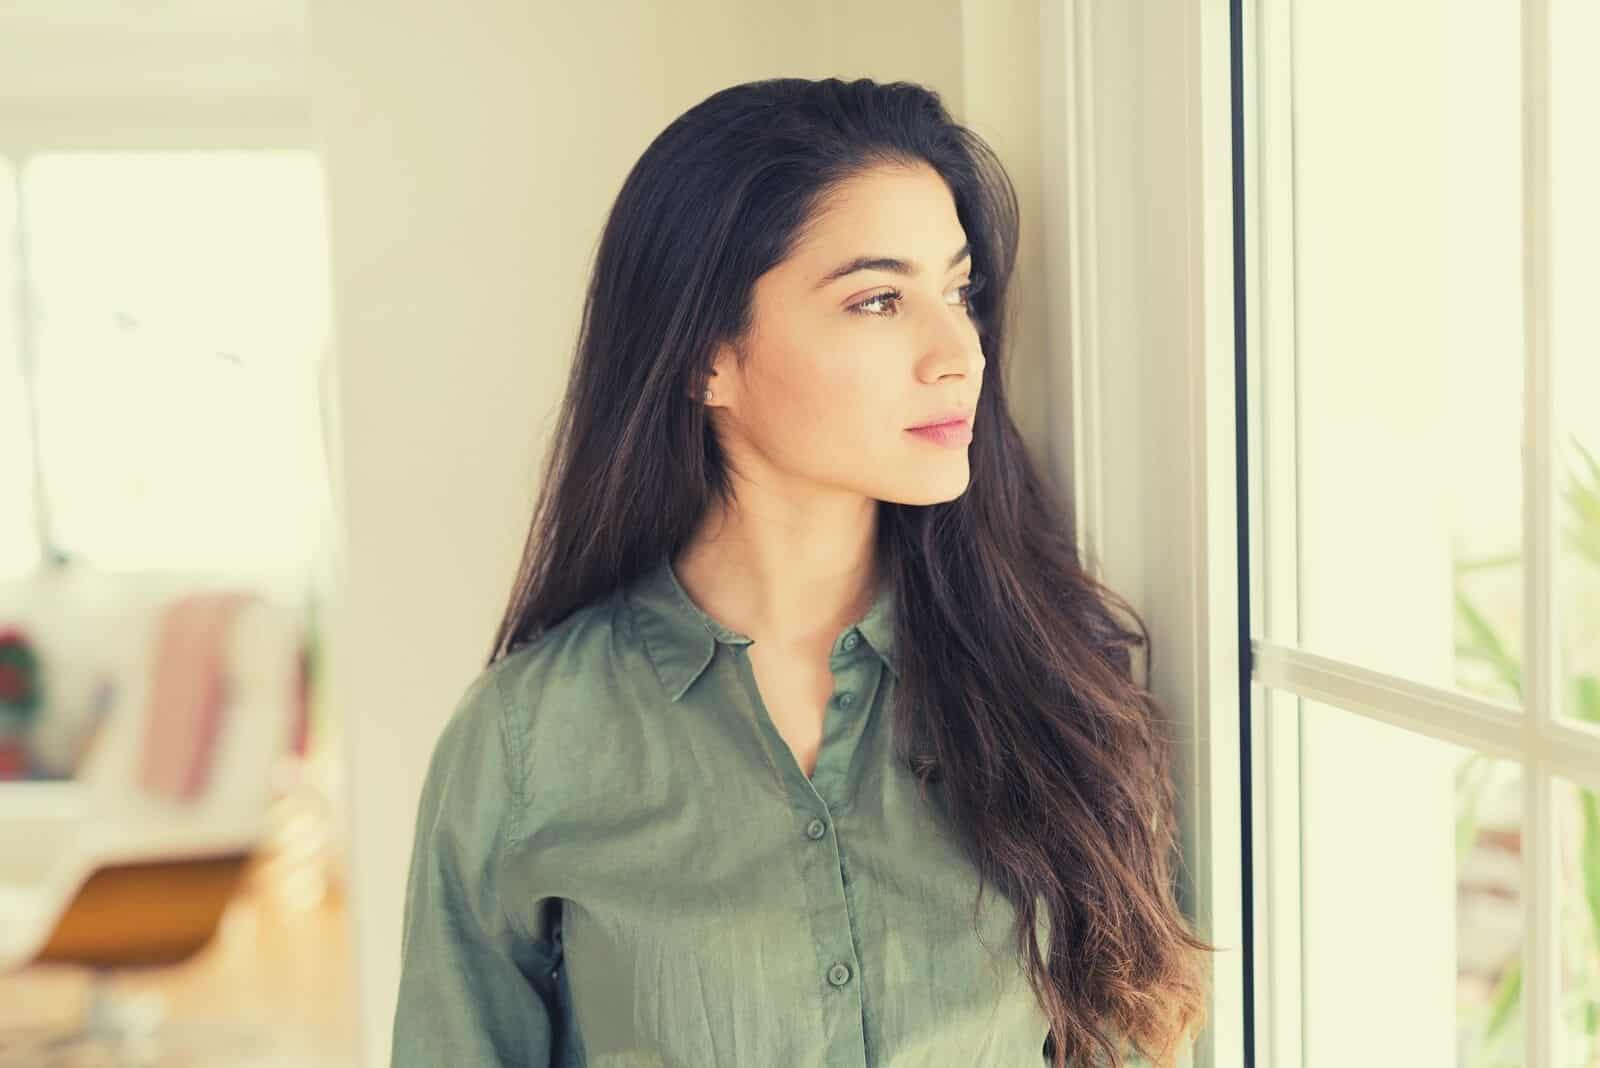 woman deeply thinking looking outside the window standing